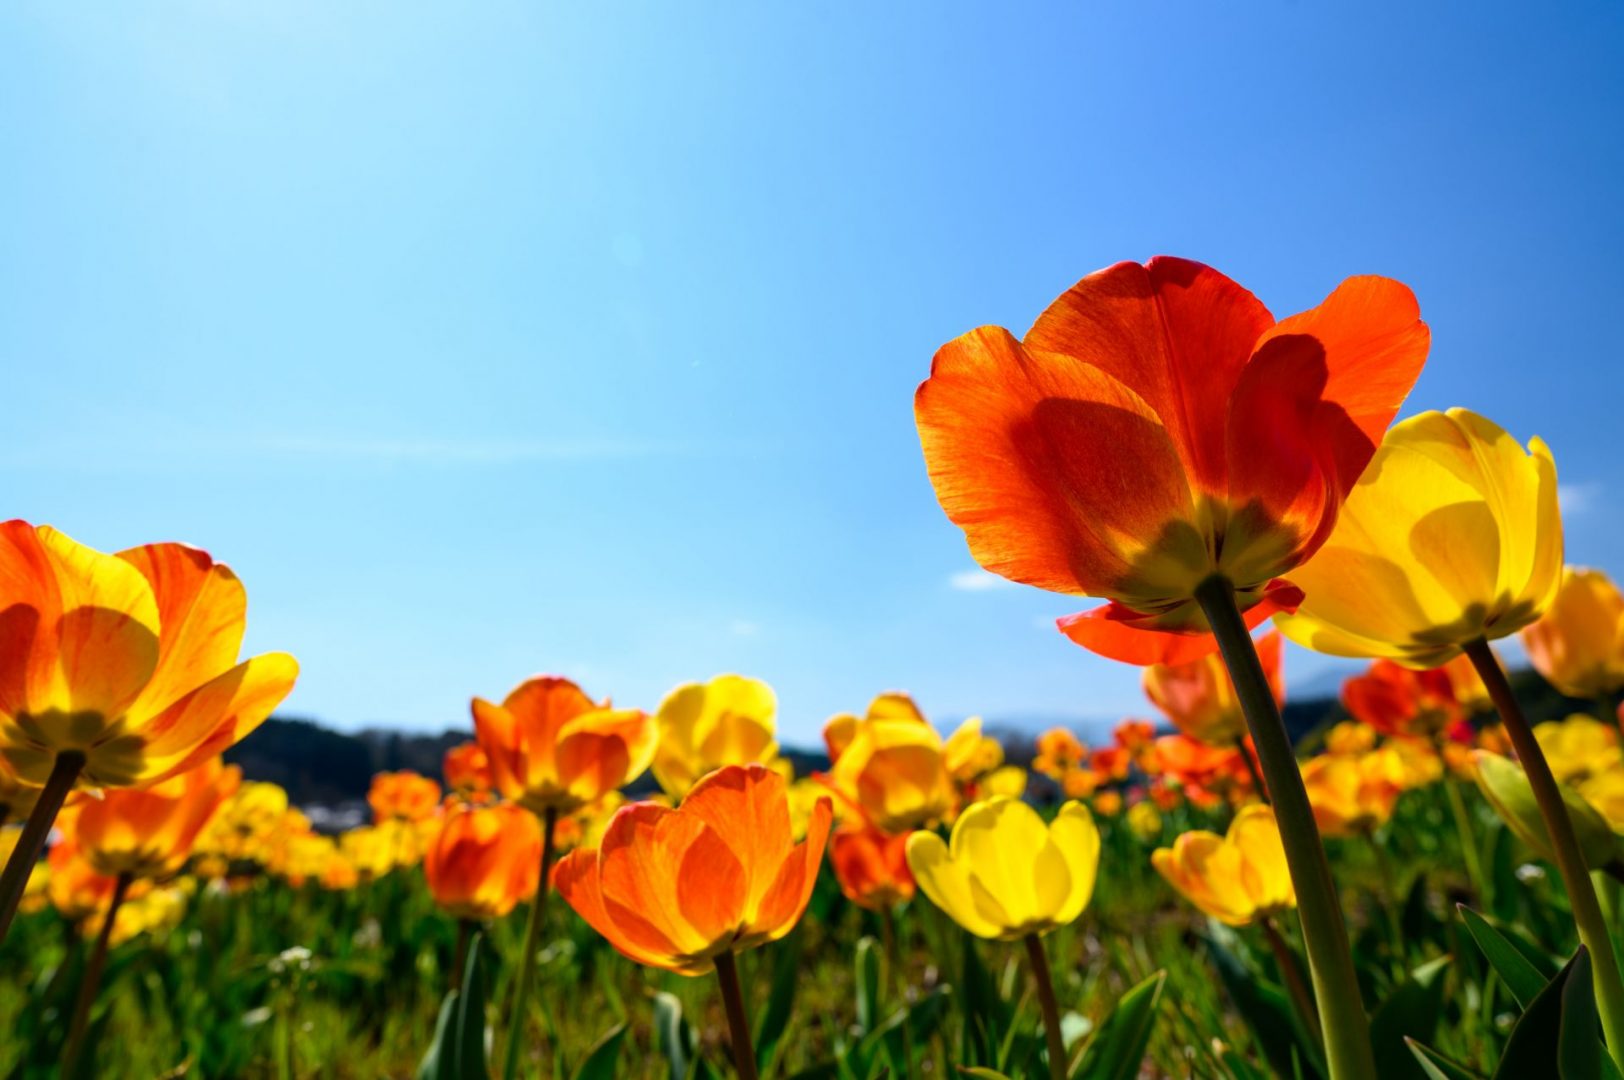 A field of vibrant orange and yellow tulips against a clear blue sky on a sunny day.